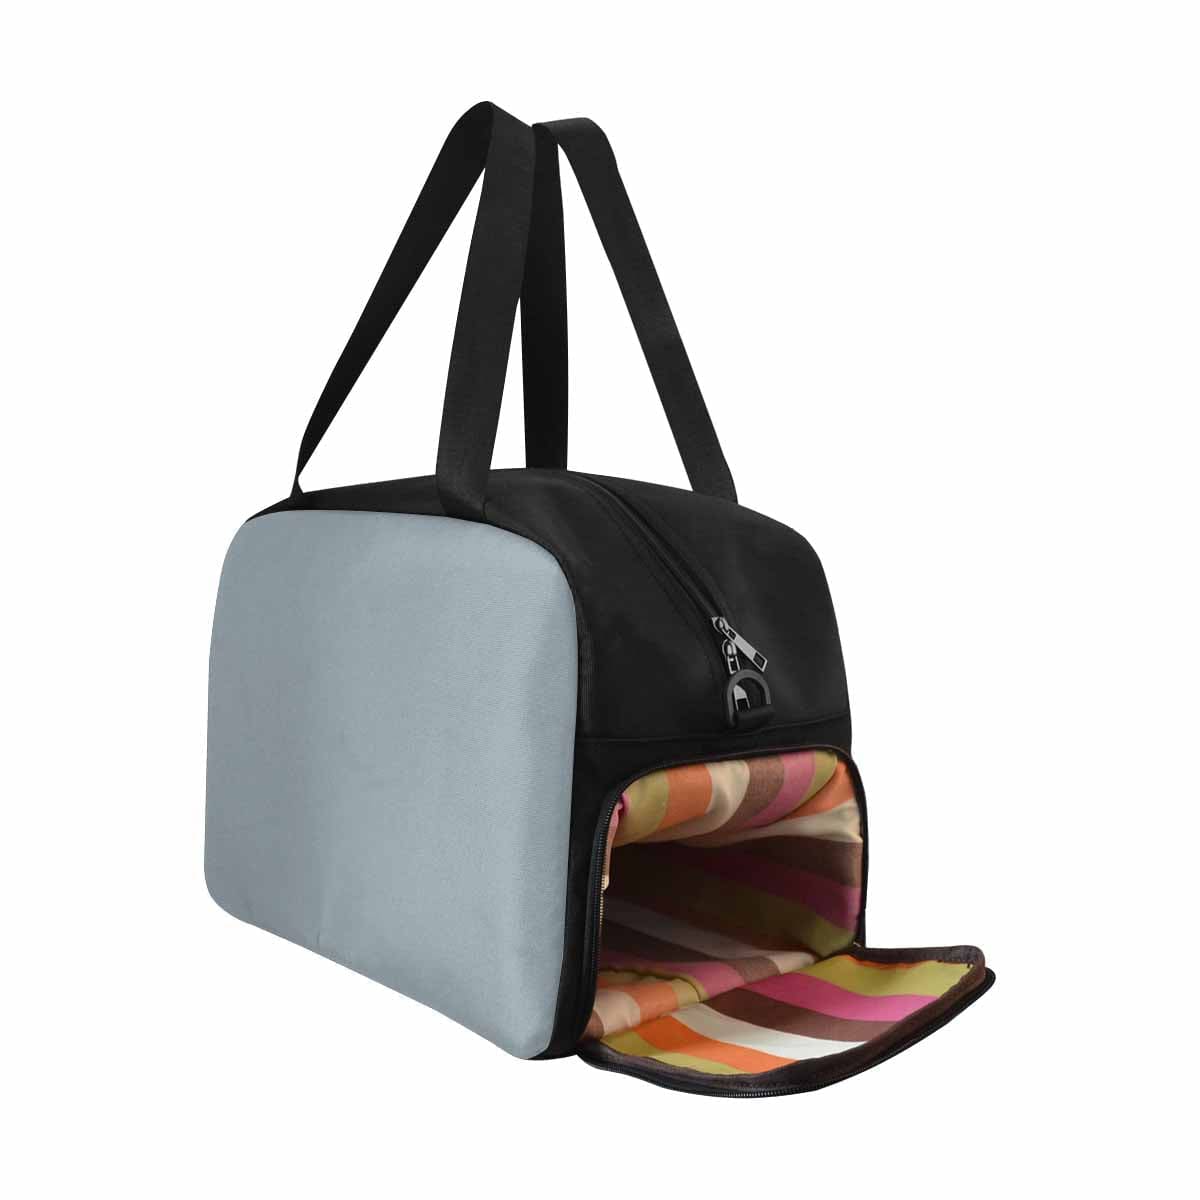 Misty Blue Gray Tote And Crossbody Travel Bag - Bags | Travel Bags | Crossbody